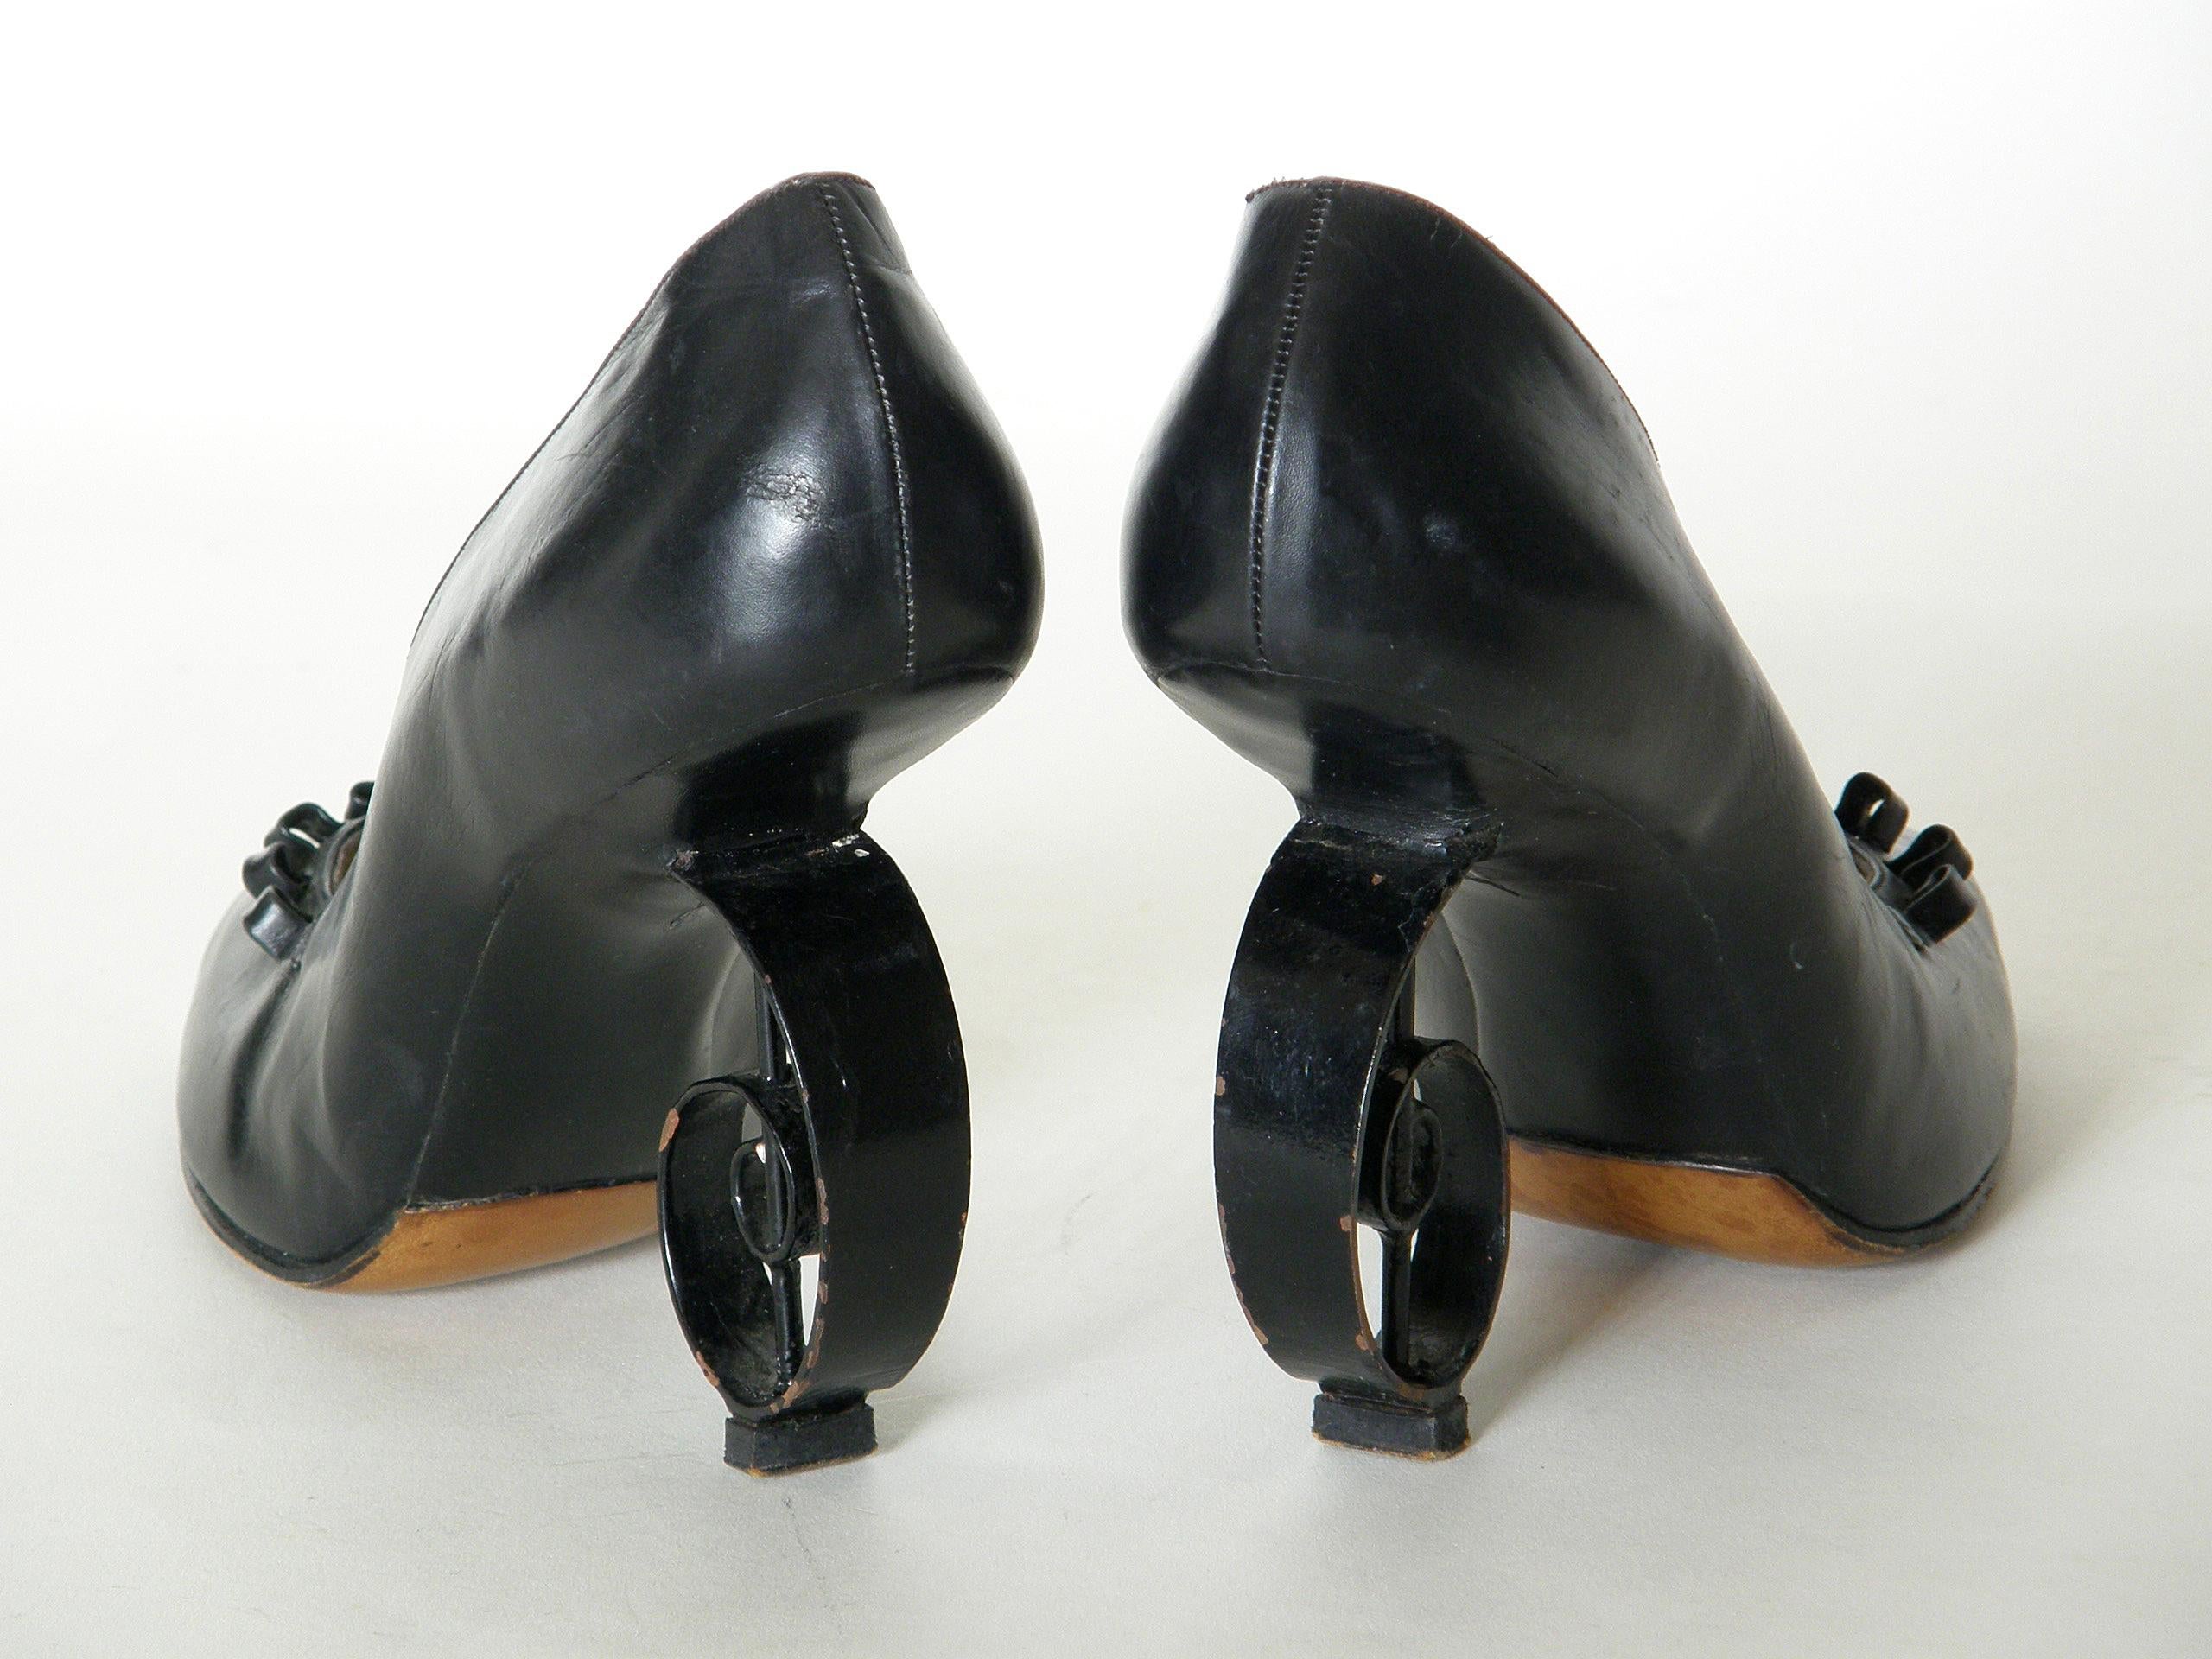 Unworn Albion Black Leather Musical Theme Pumps with G-Clef Heel Design ...